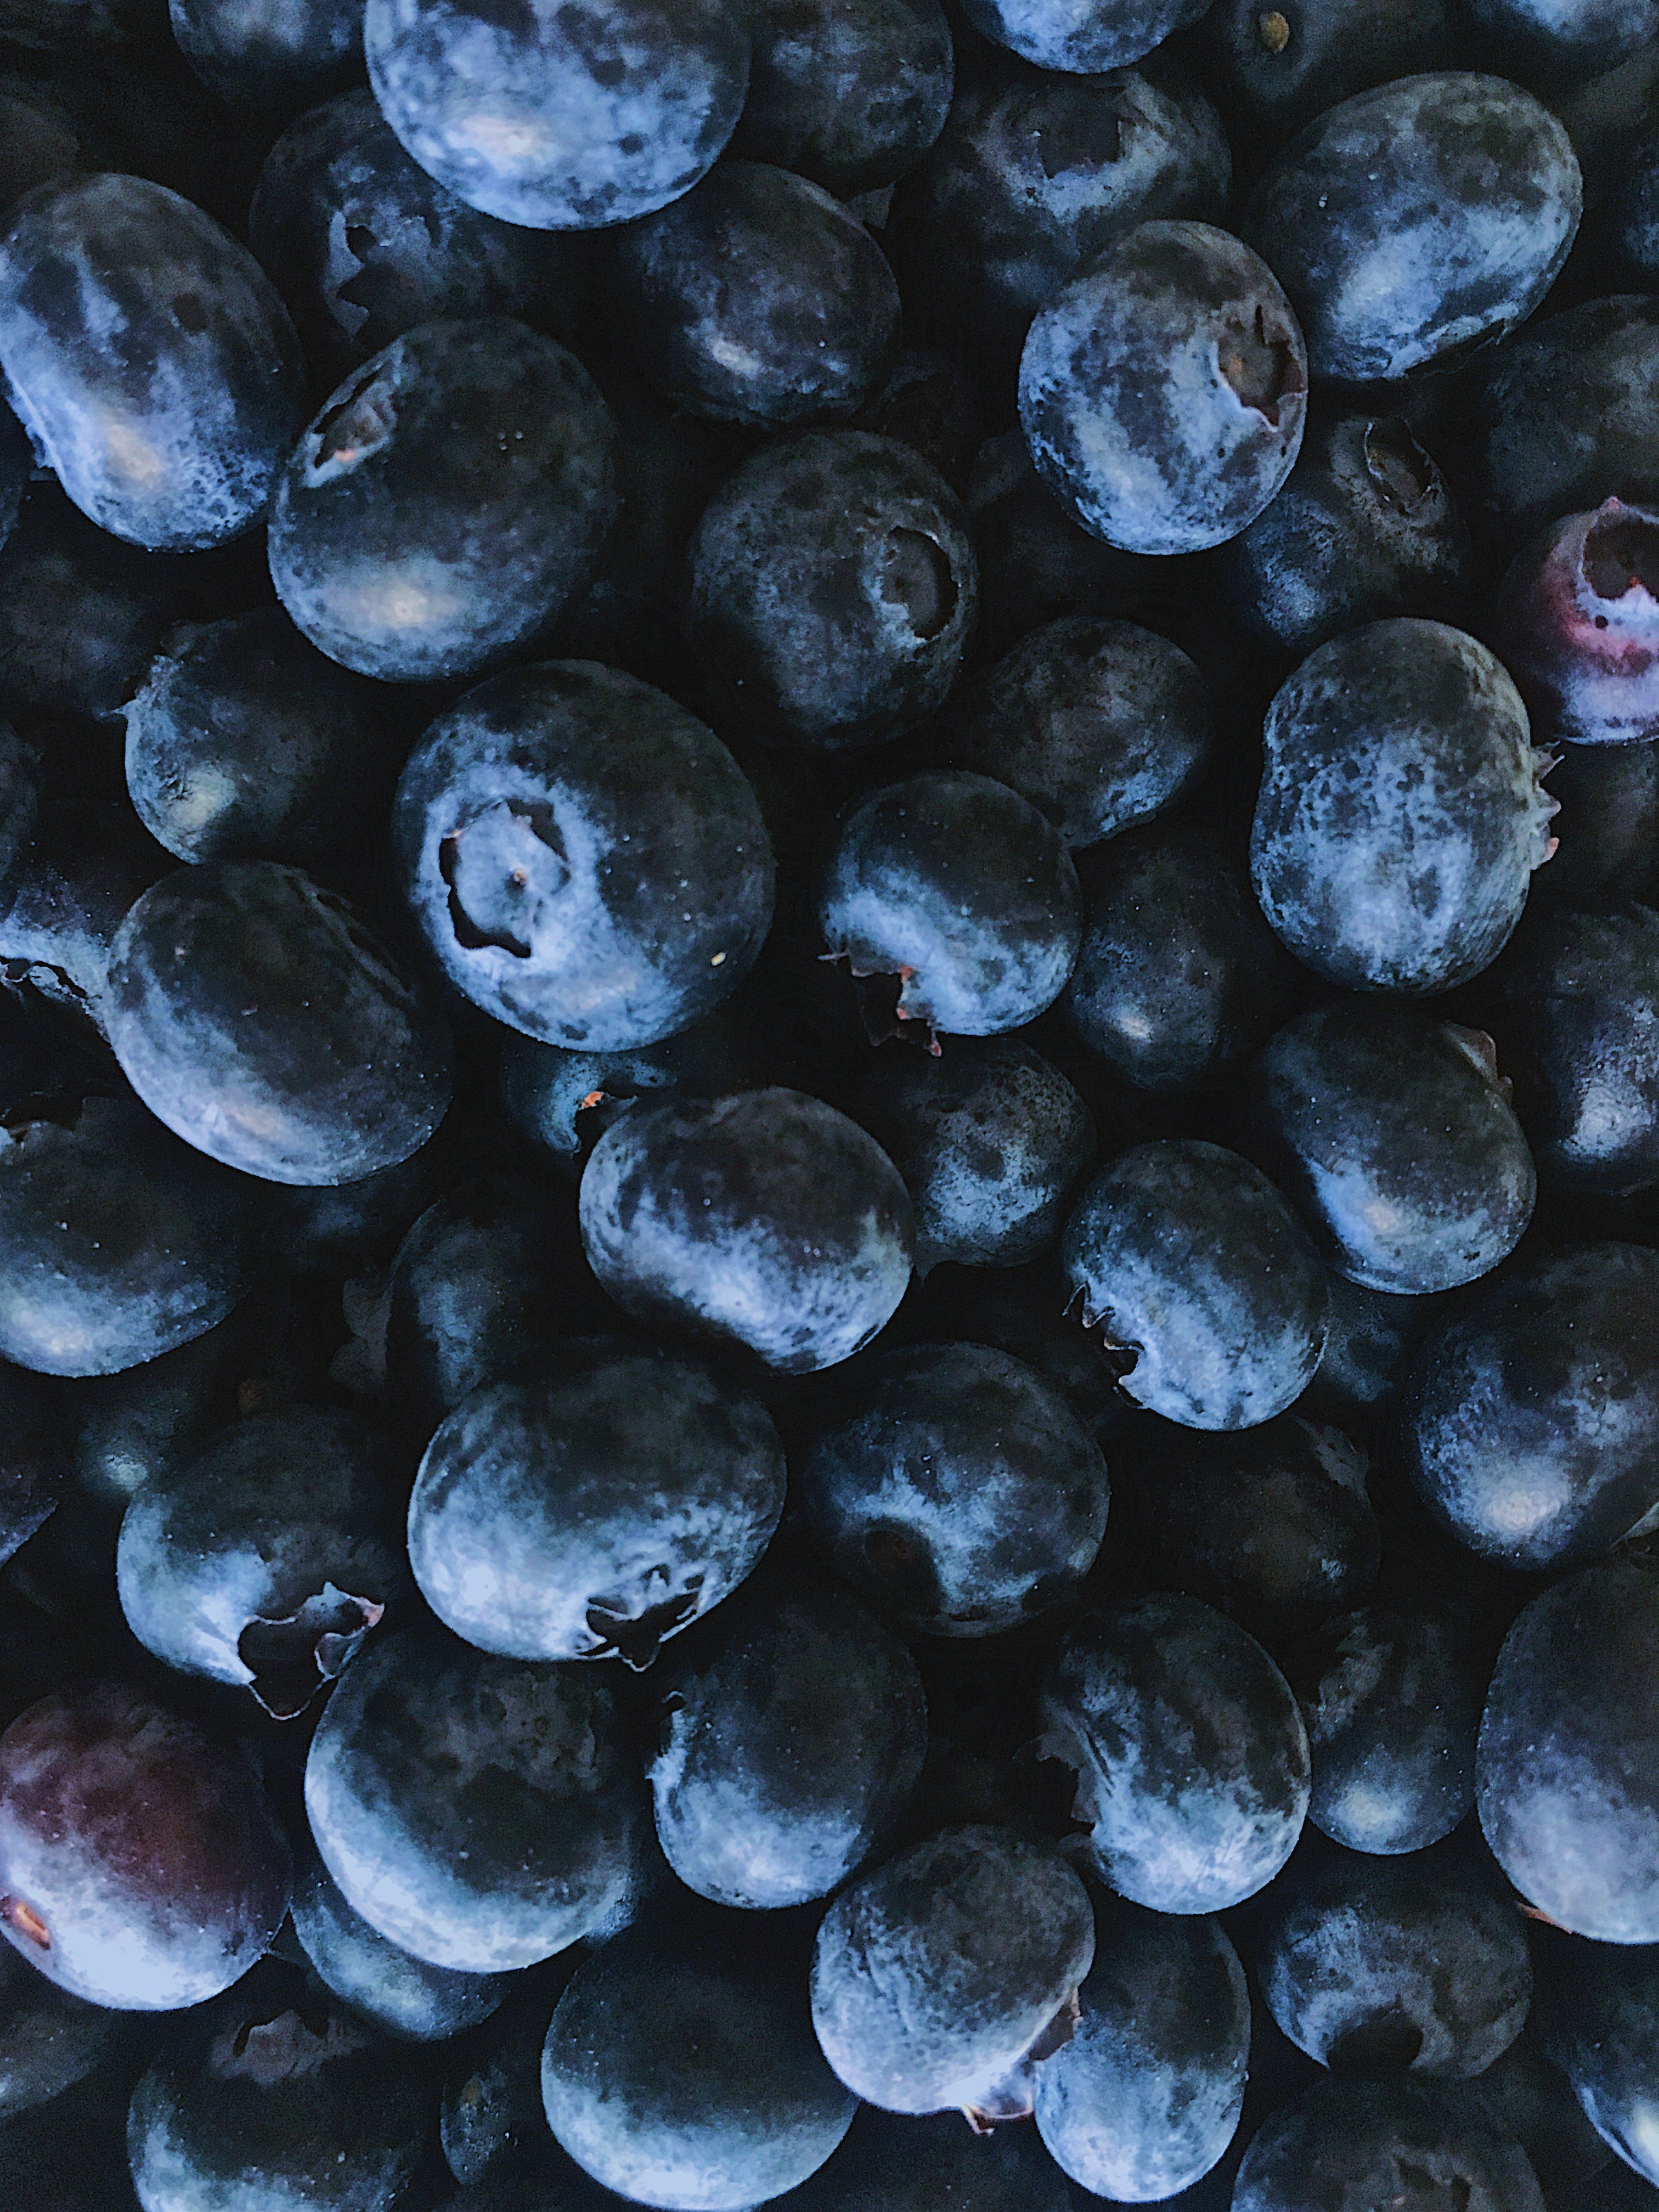 close up image of blueberries